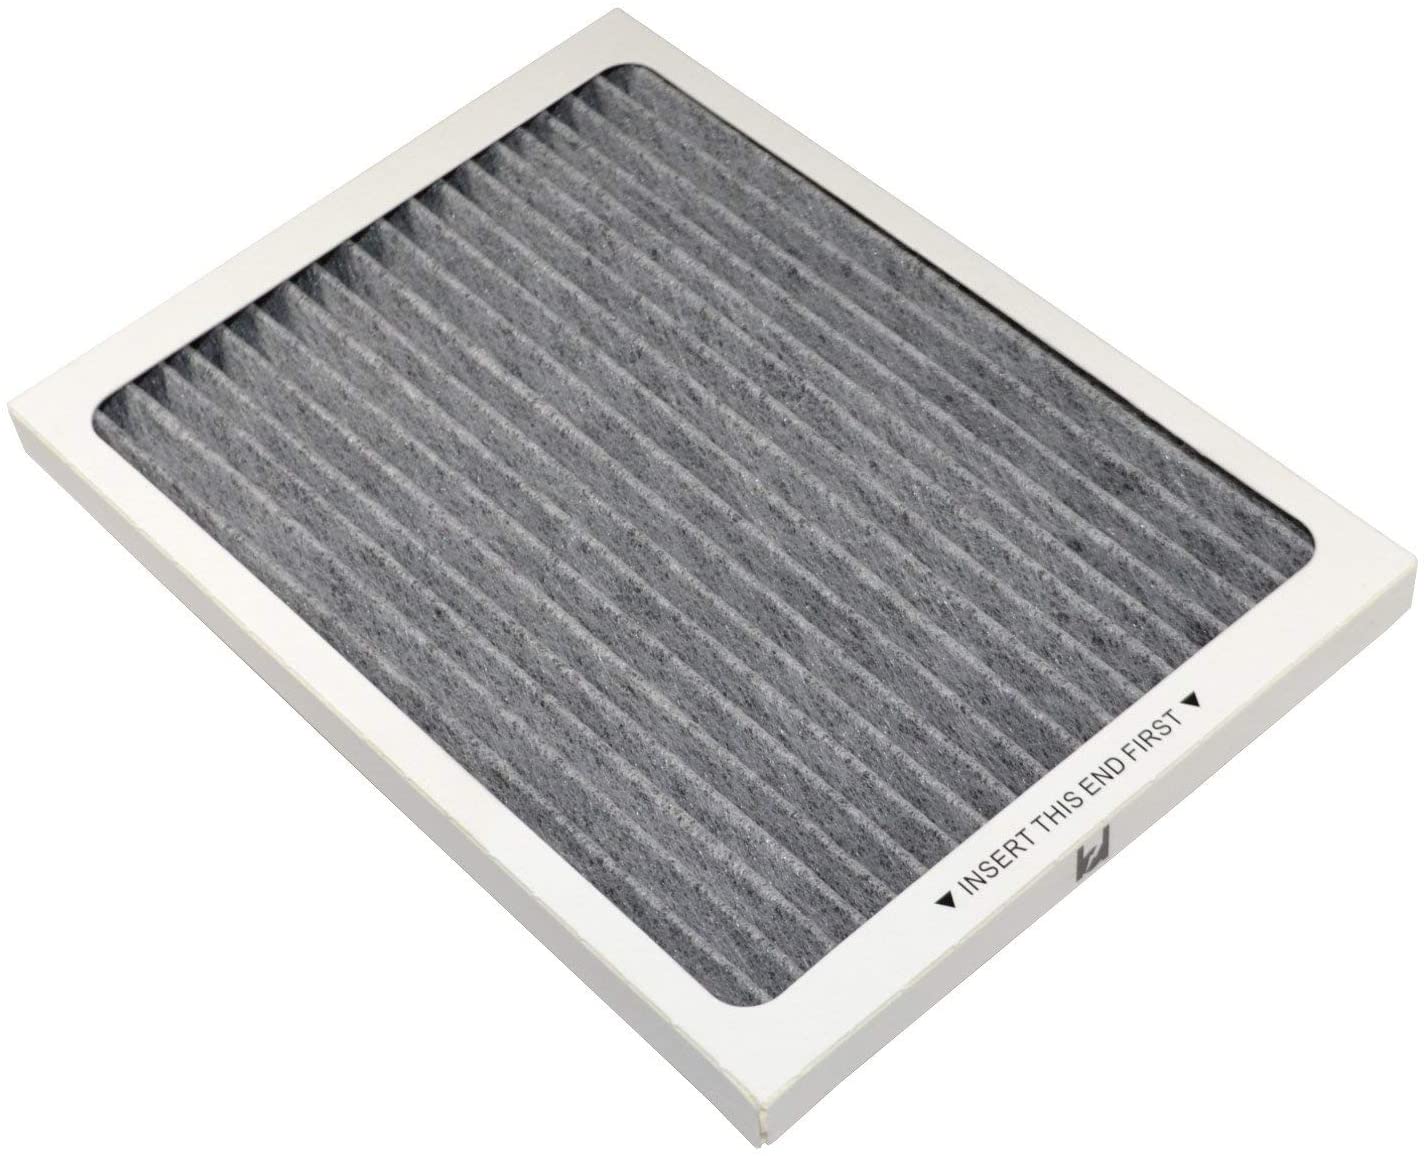 HQRP Carbon Air Filter (2-pack) for Frigidaire Gallery & Professional series Side-by-Side / French door Refrigerators, EAFCBF PAULTRA - image 4 of 7